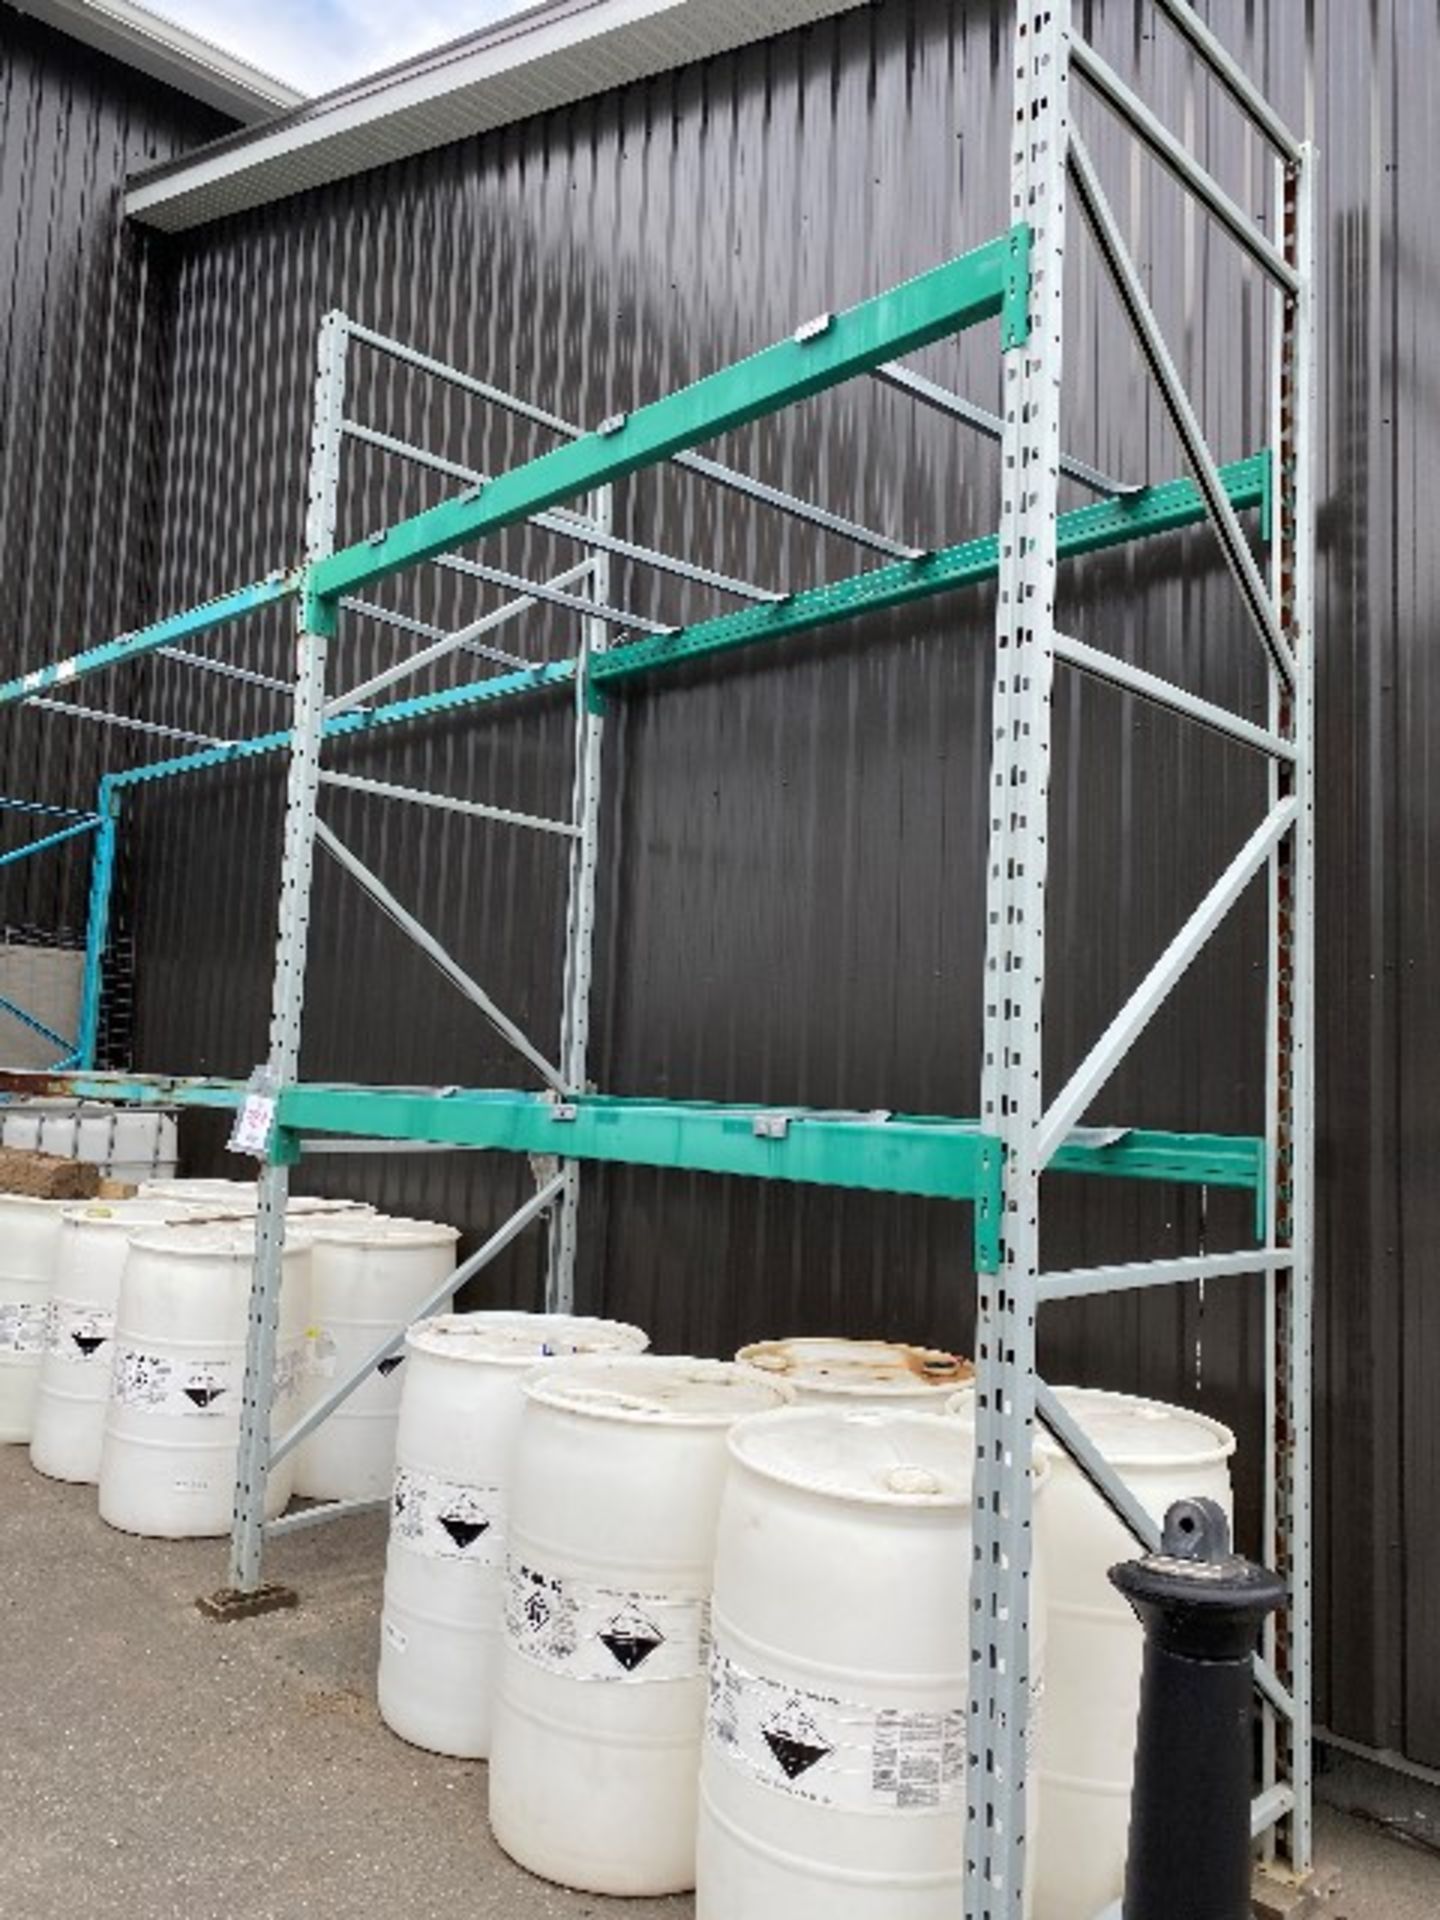 Industrial shelving, 3pcs uprights, 8pcs cross bars, 12pcs safety bars, 8' x 8' x 44”, 2 sections - Image 2 of 3